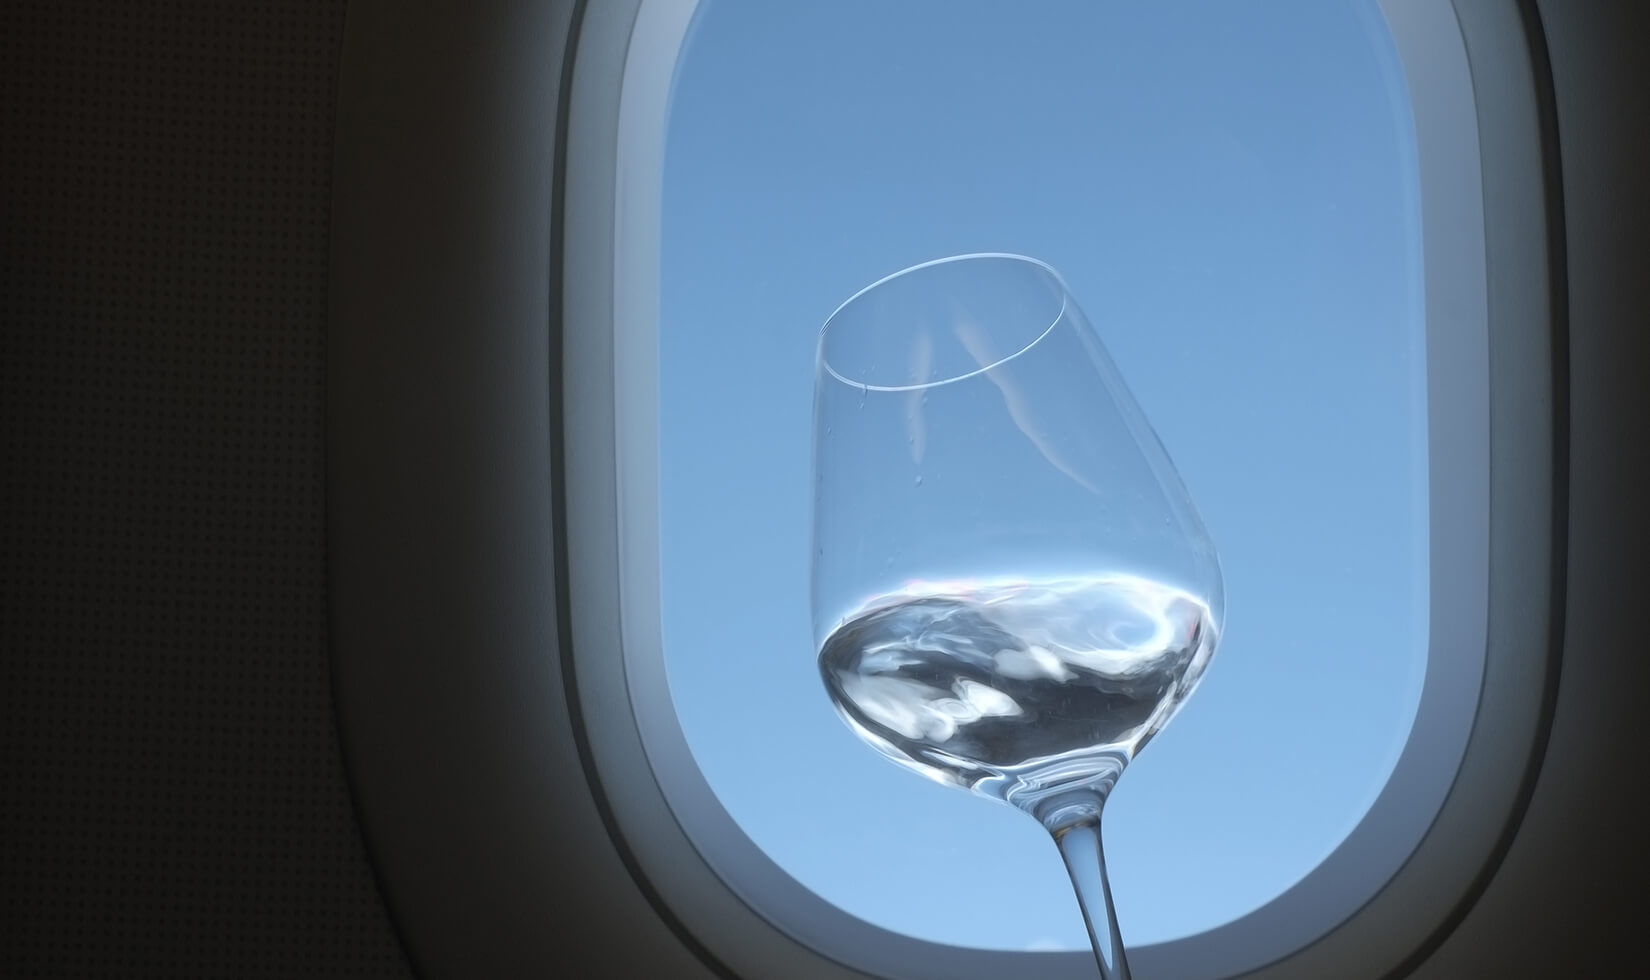 https://winecountrytable.com/wp-content/uploads/2018/10/Glass-of-Chardonnay-on-an-Airplane-How-to-Choose-the-Best-Wine-Flying-WEB-SIZE-2.jpg